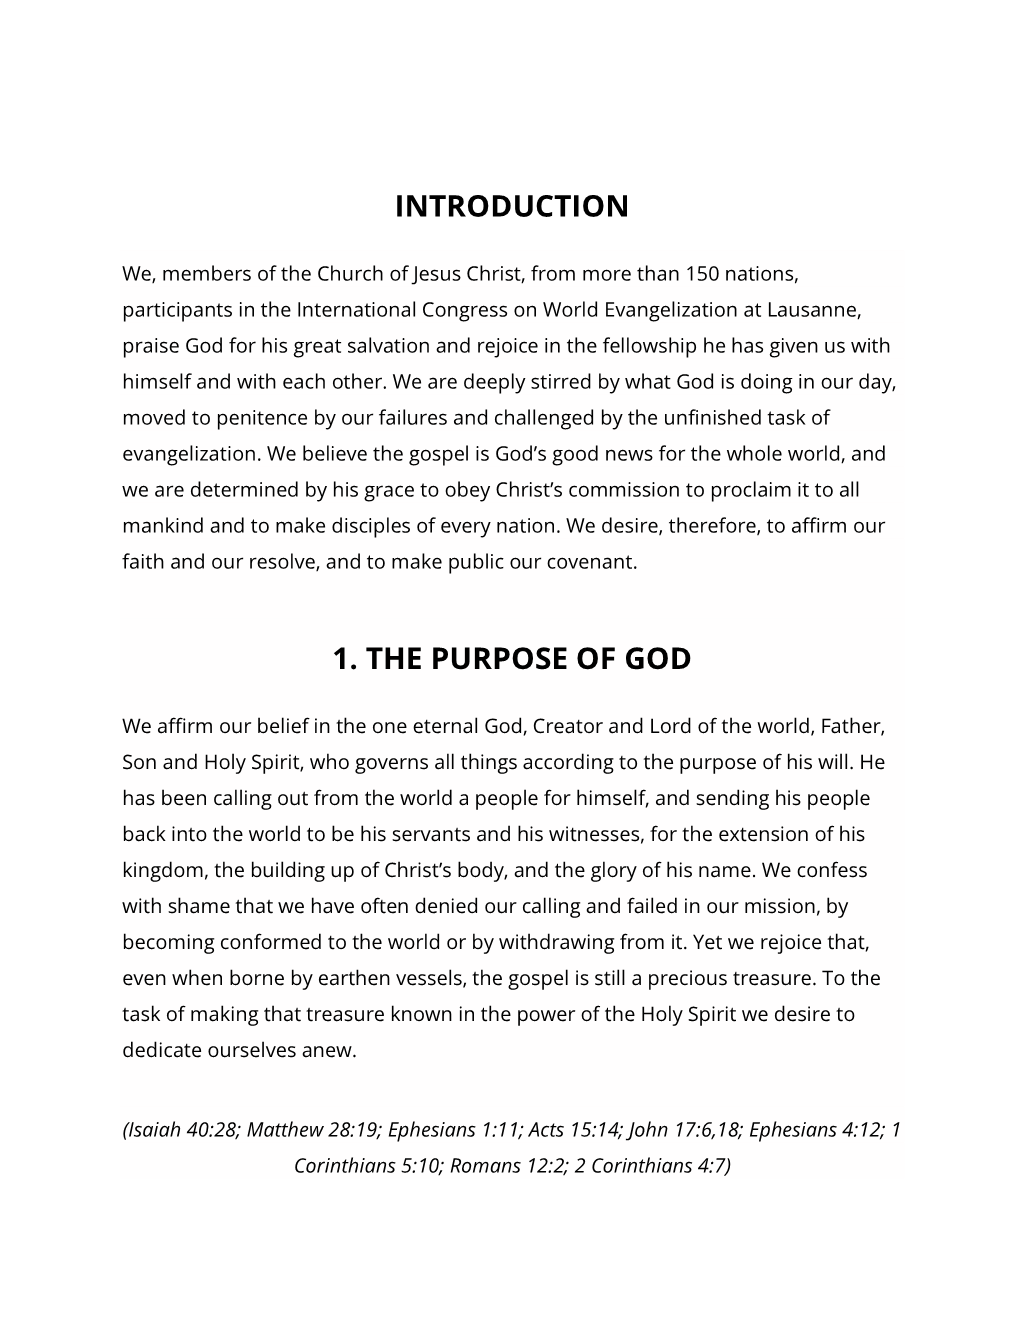 Introduction 1. the Purpose Of